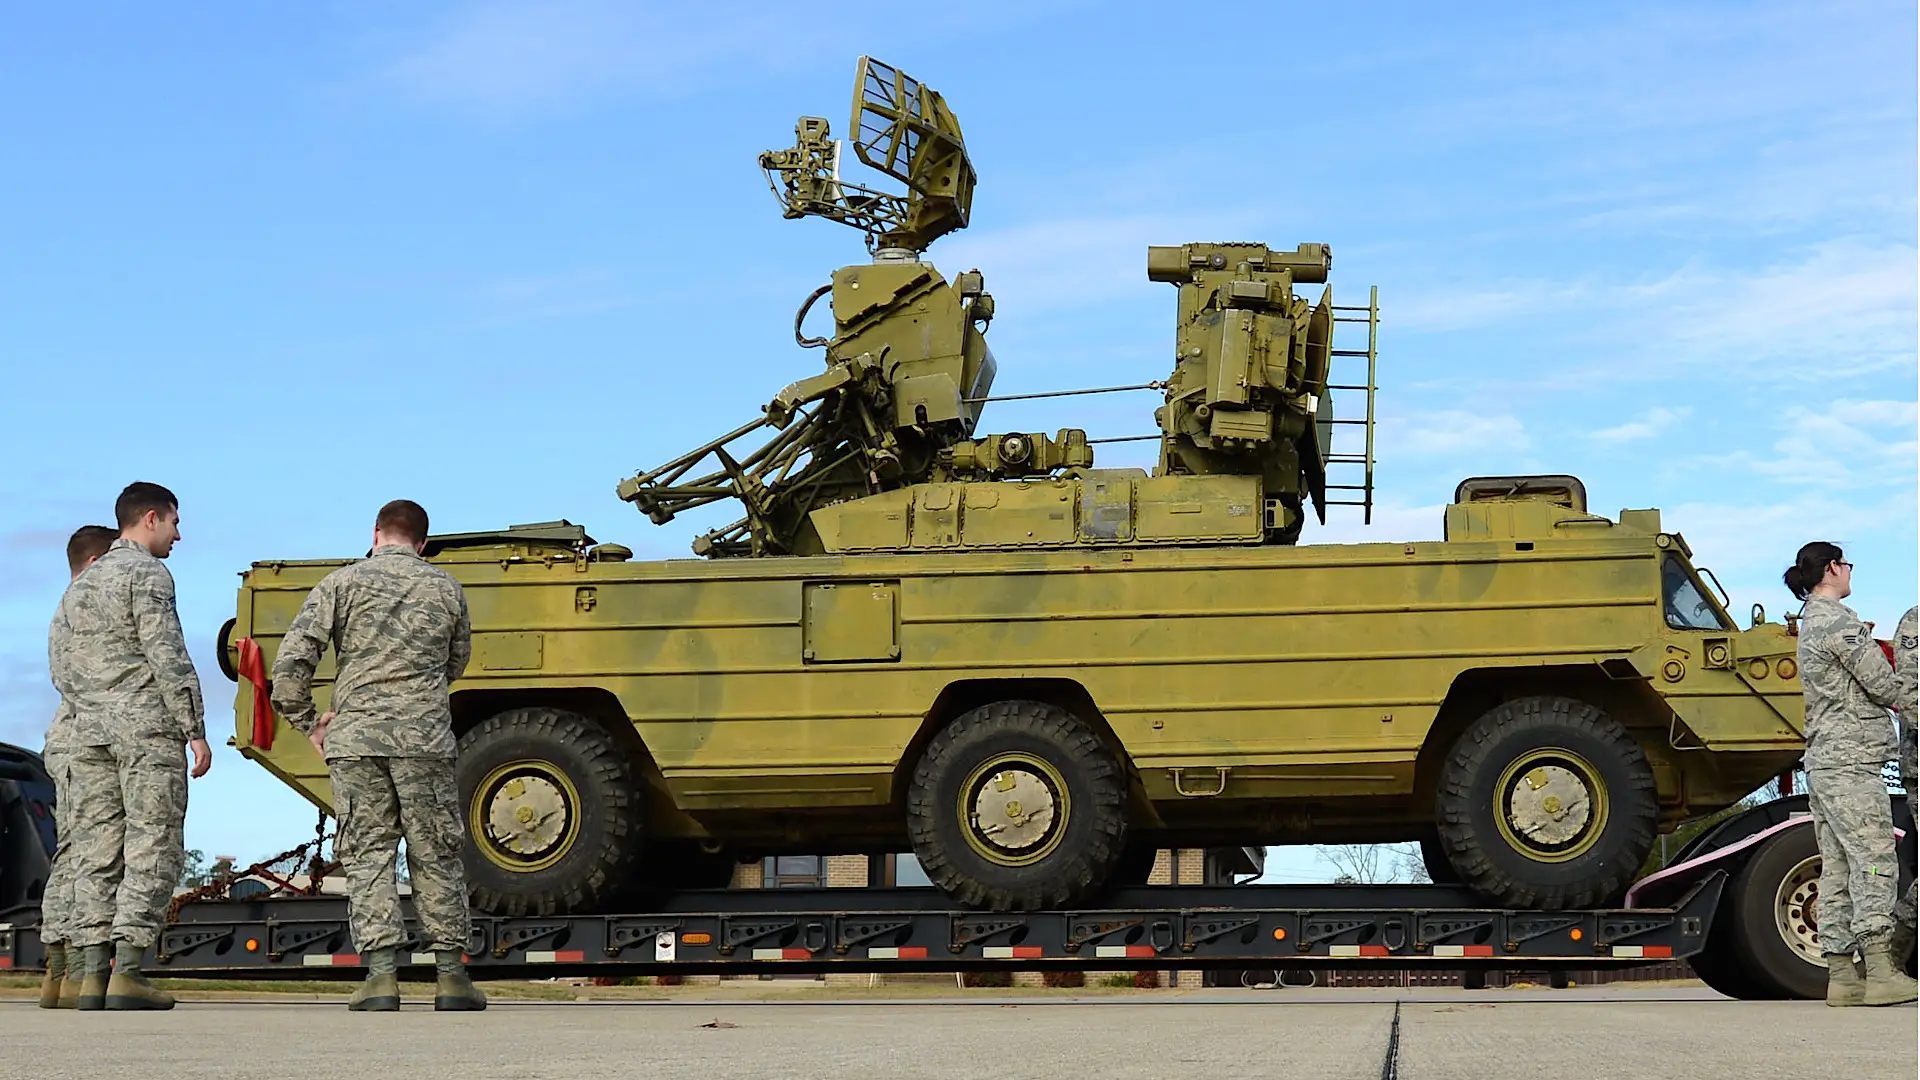 Osa-AKM air defense missile systems in possession of the US military